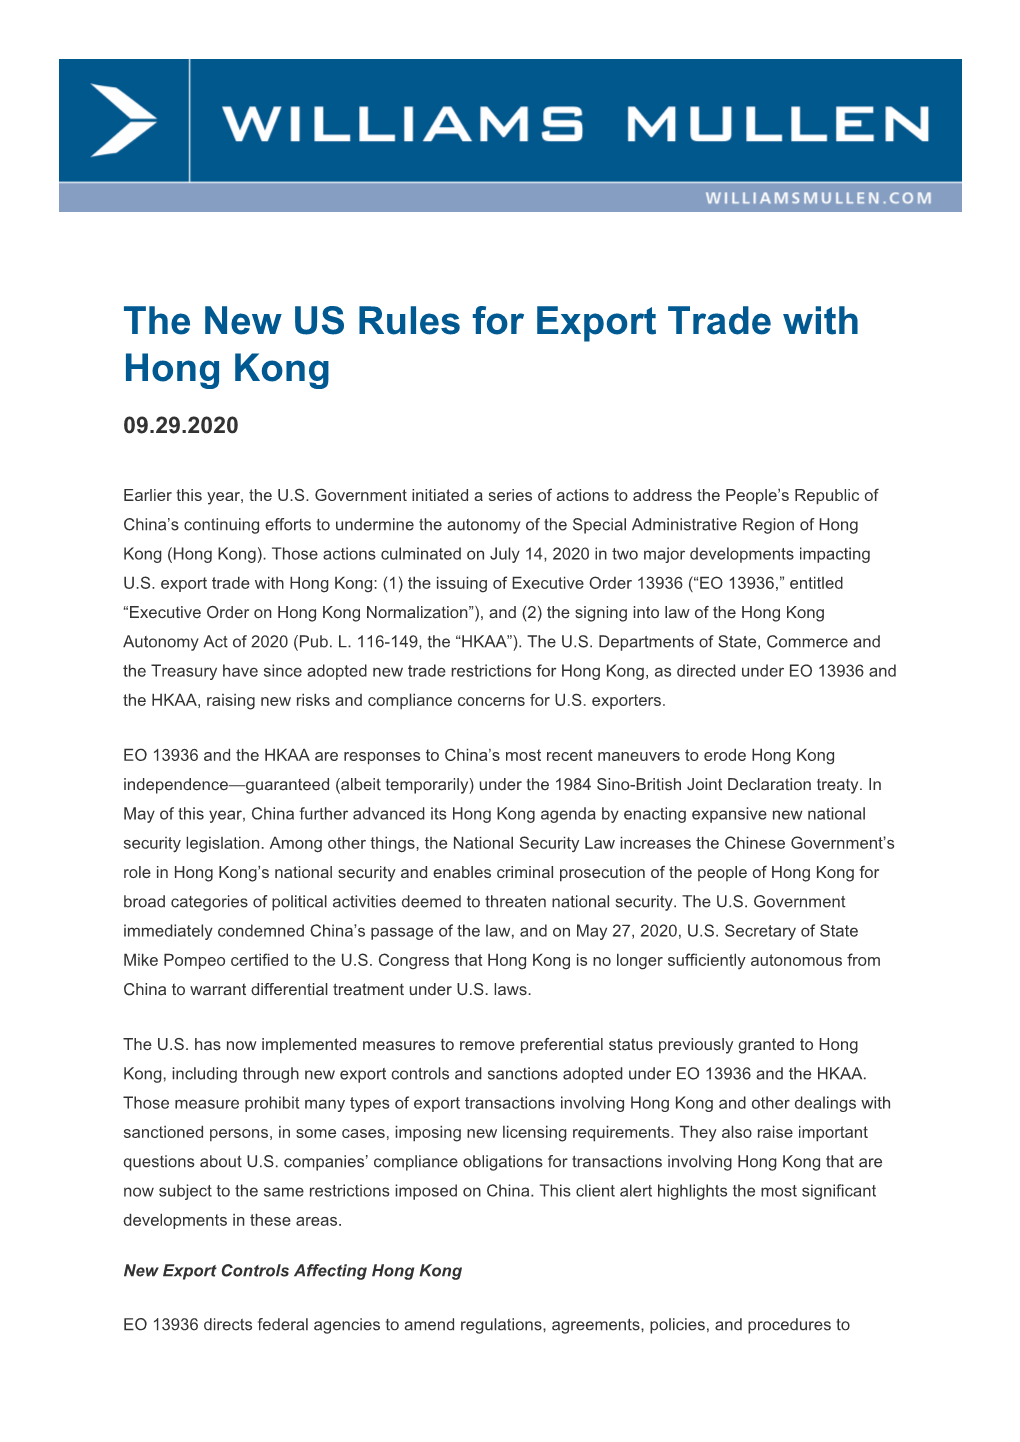 The New US Rules for Export Trade with Hong Kong